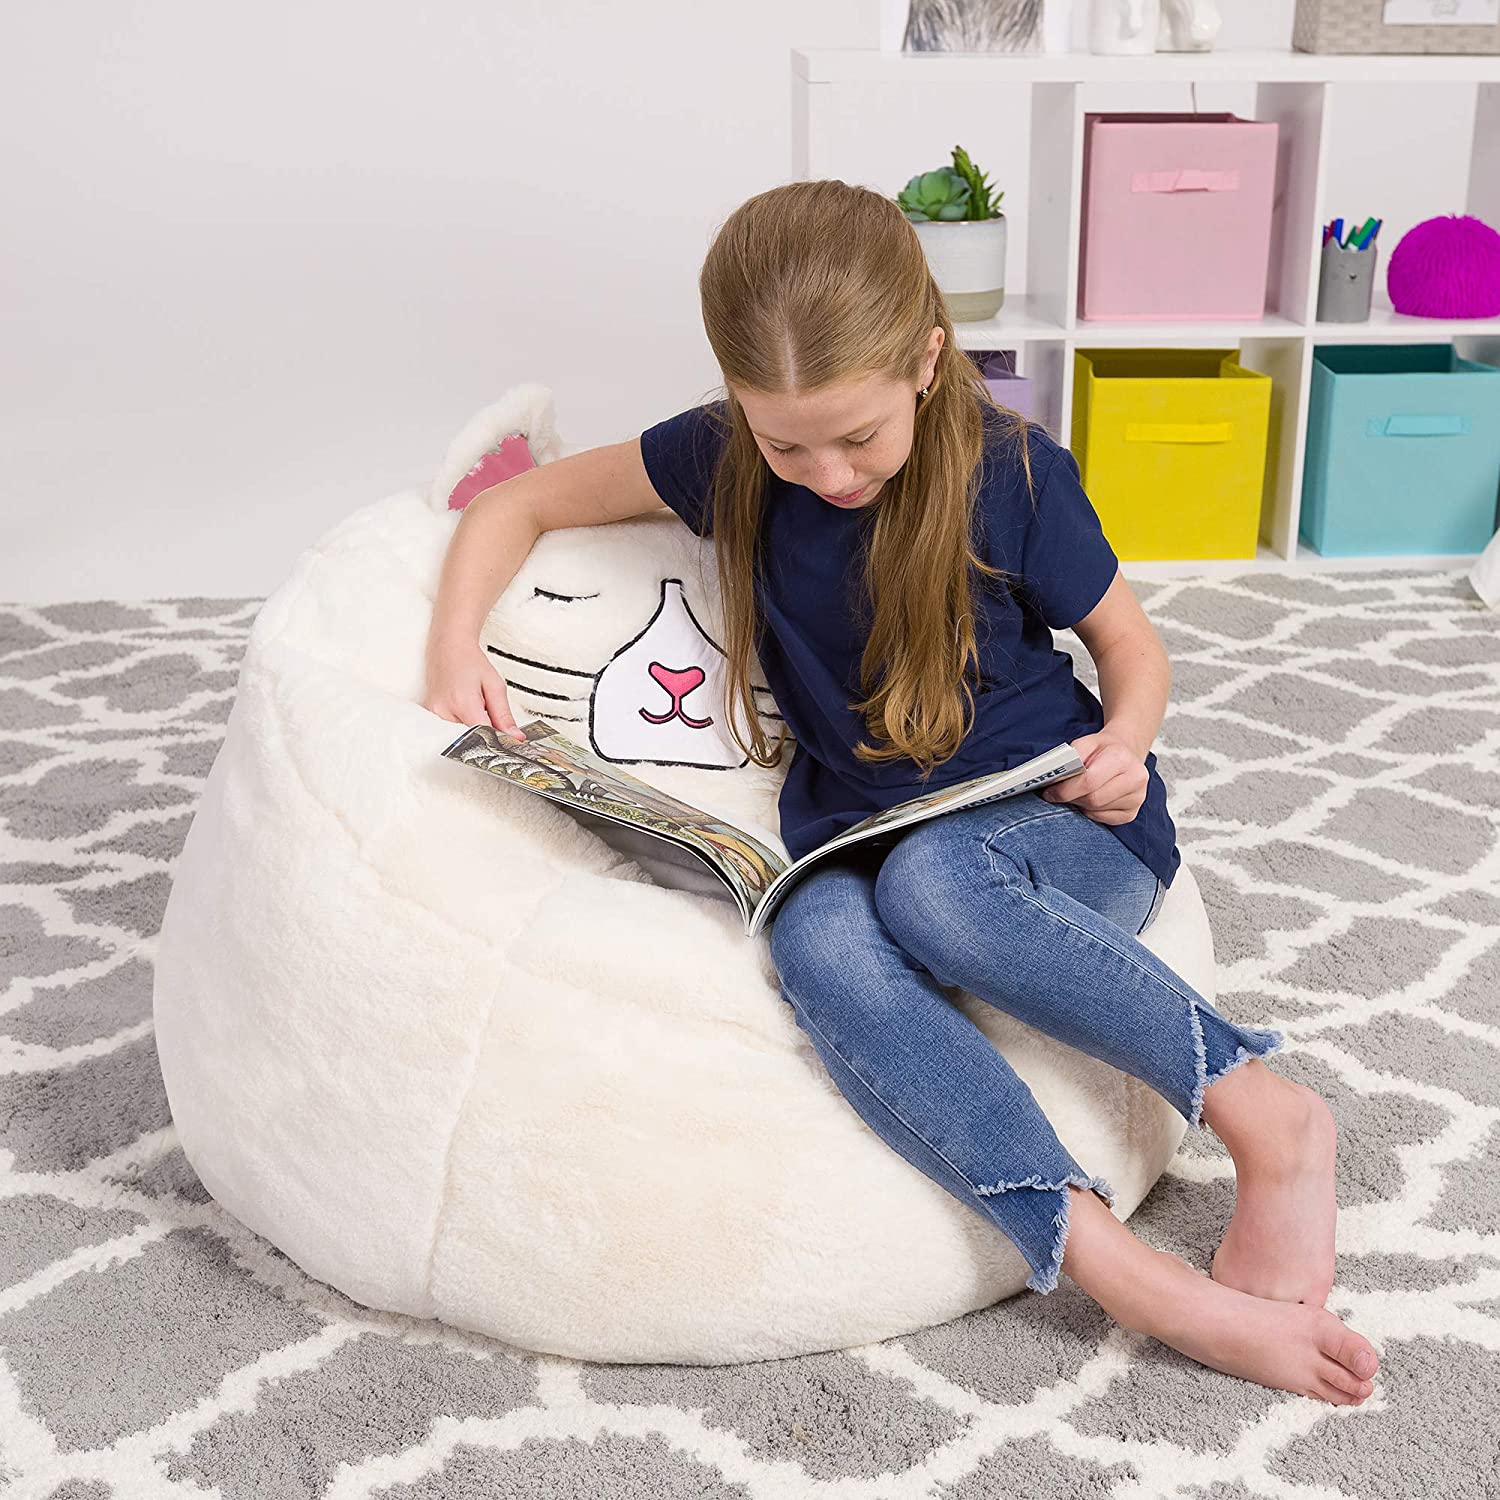 Top 10 Best Bean Bag Chairs for Kids Reviews